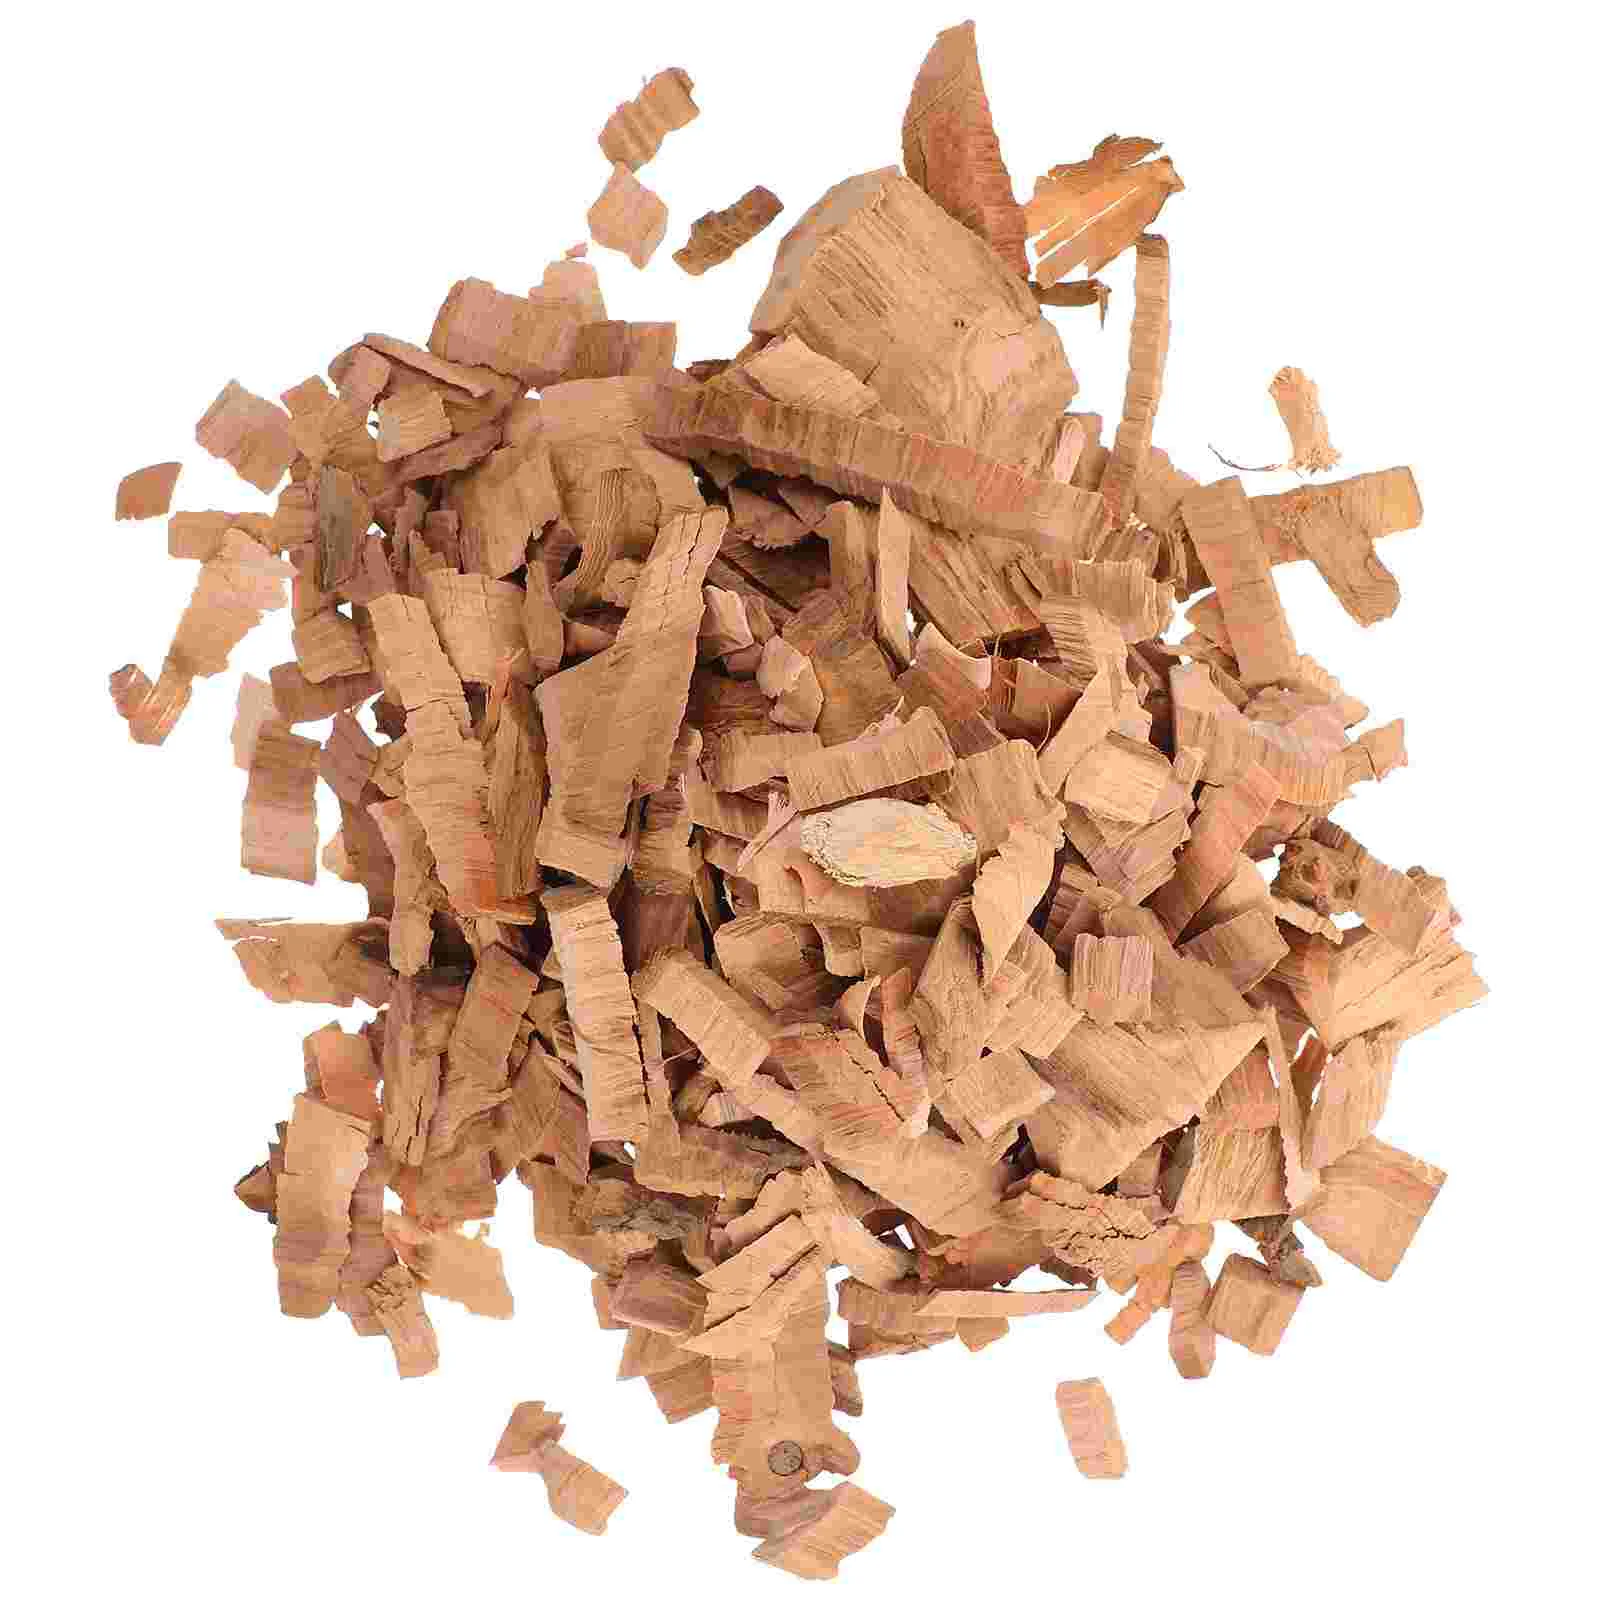 

Wood Chips Chunks Smoker Apple Smoking Bbq Barbecuecooking Products Accessories Camping Pecanoak Shavings Sawdust Hickory